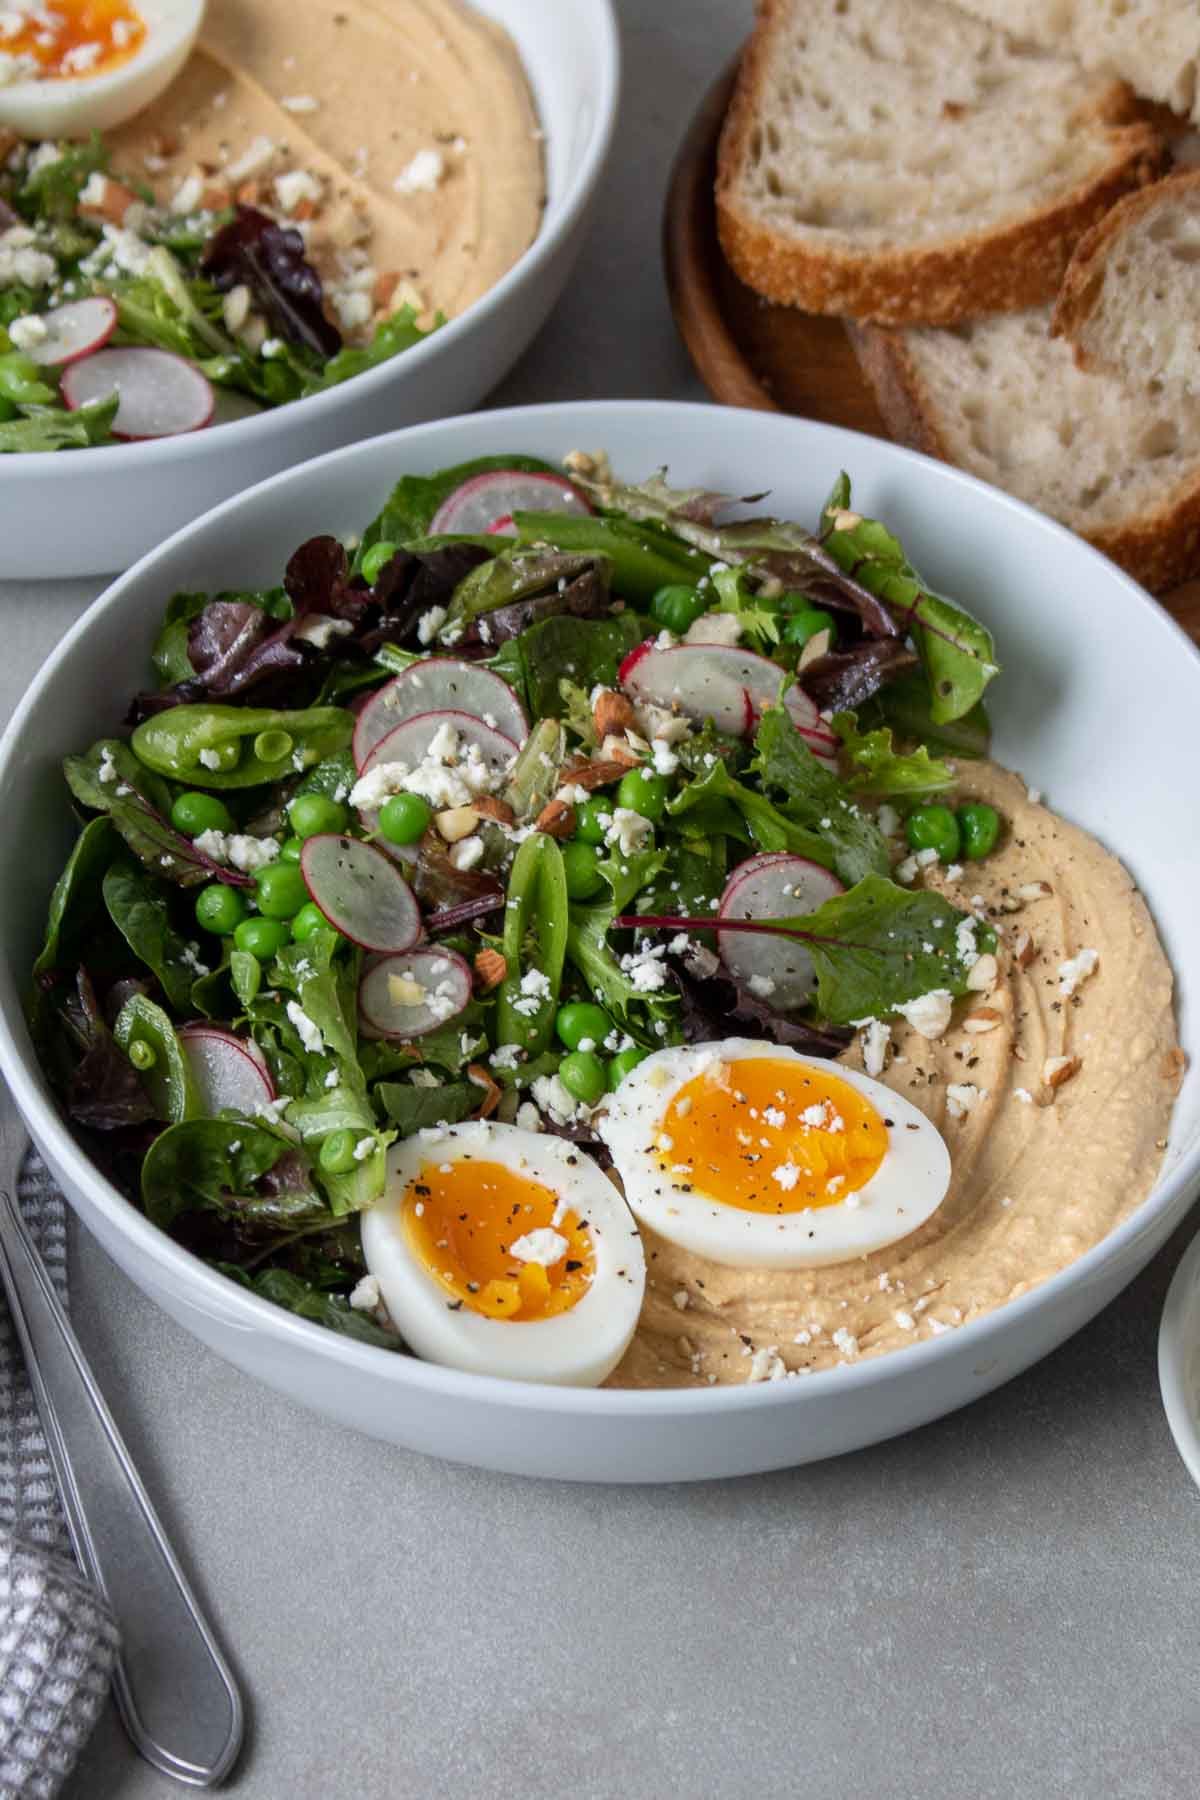 Two bowls filled with hummus and salad, topped with a soft-boiled egg, feta cheese, chopped almonds, and a side of sourdough bread.